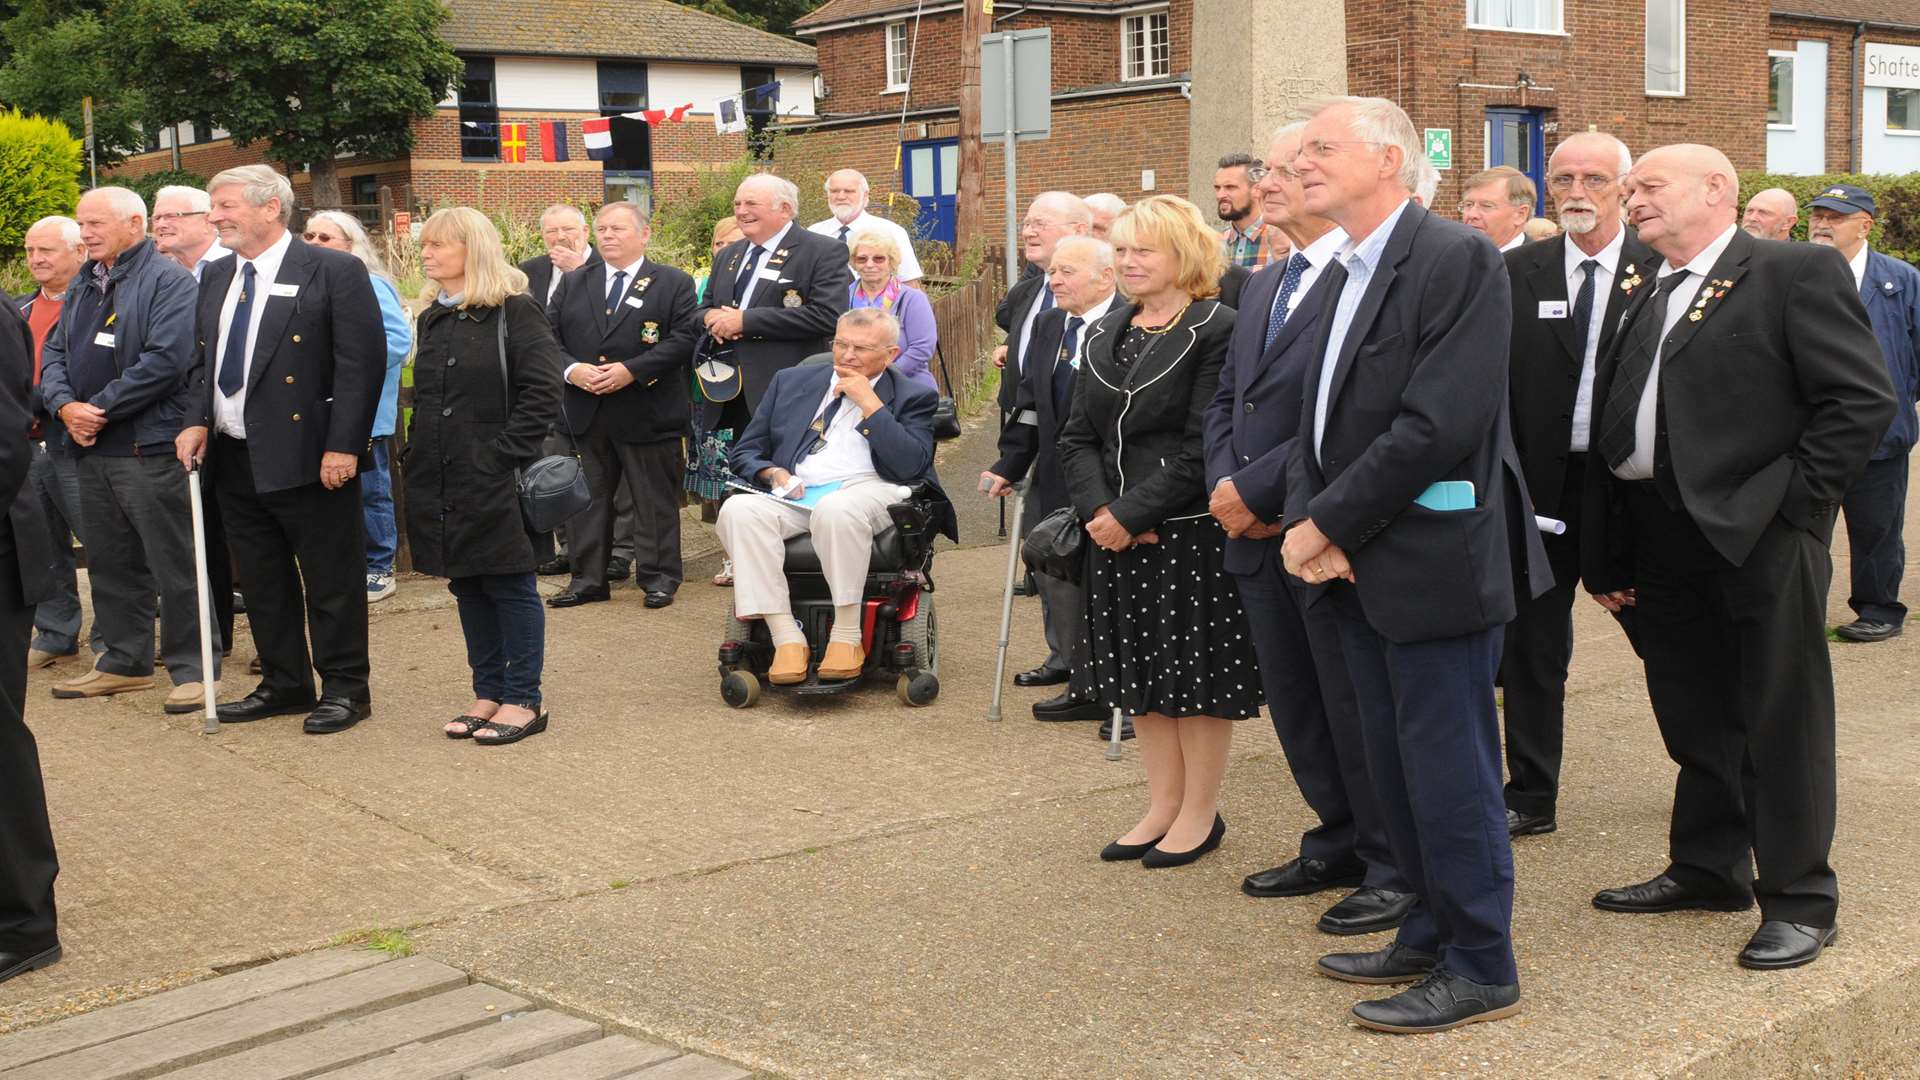 More than 70 members of the Arethusa Old Boys Association attended the reunion. Picture: Steve Crispe.